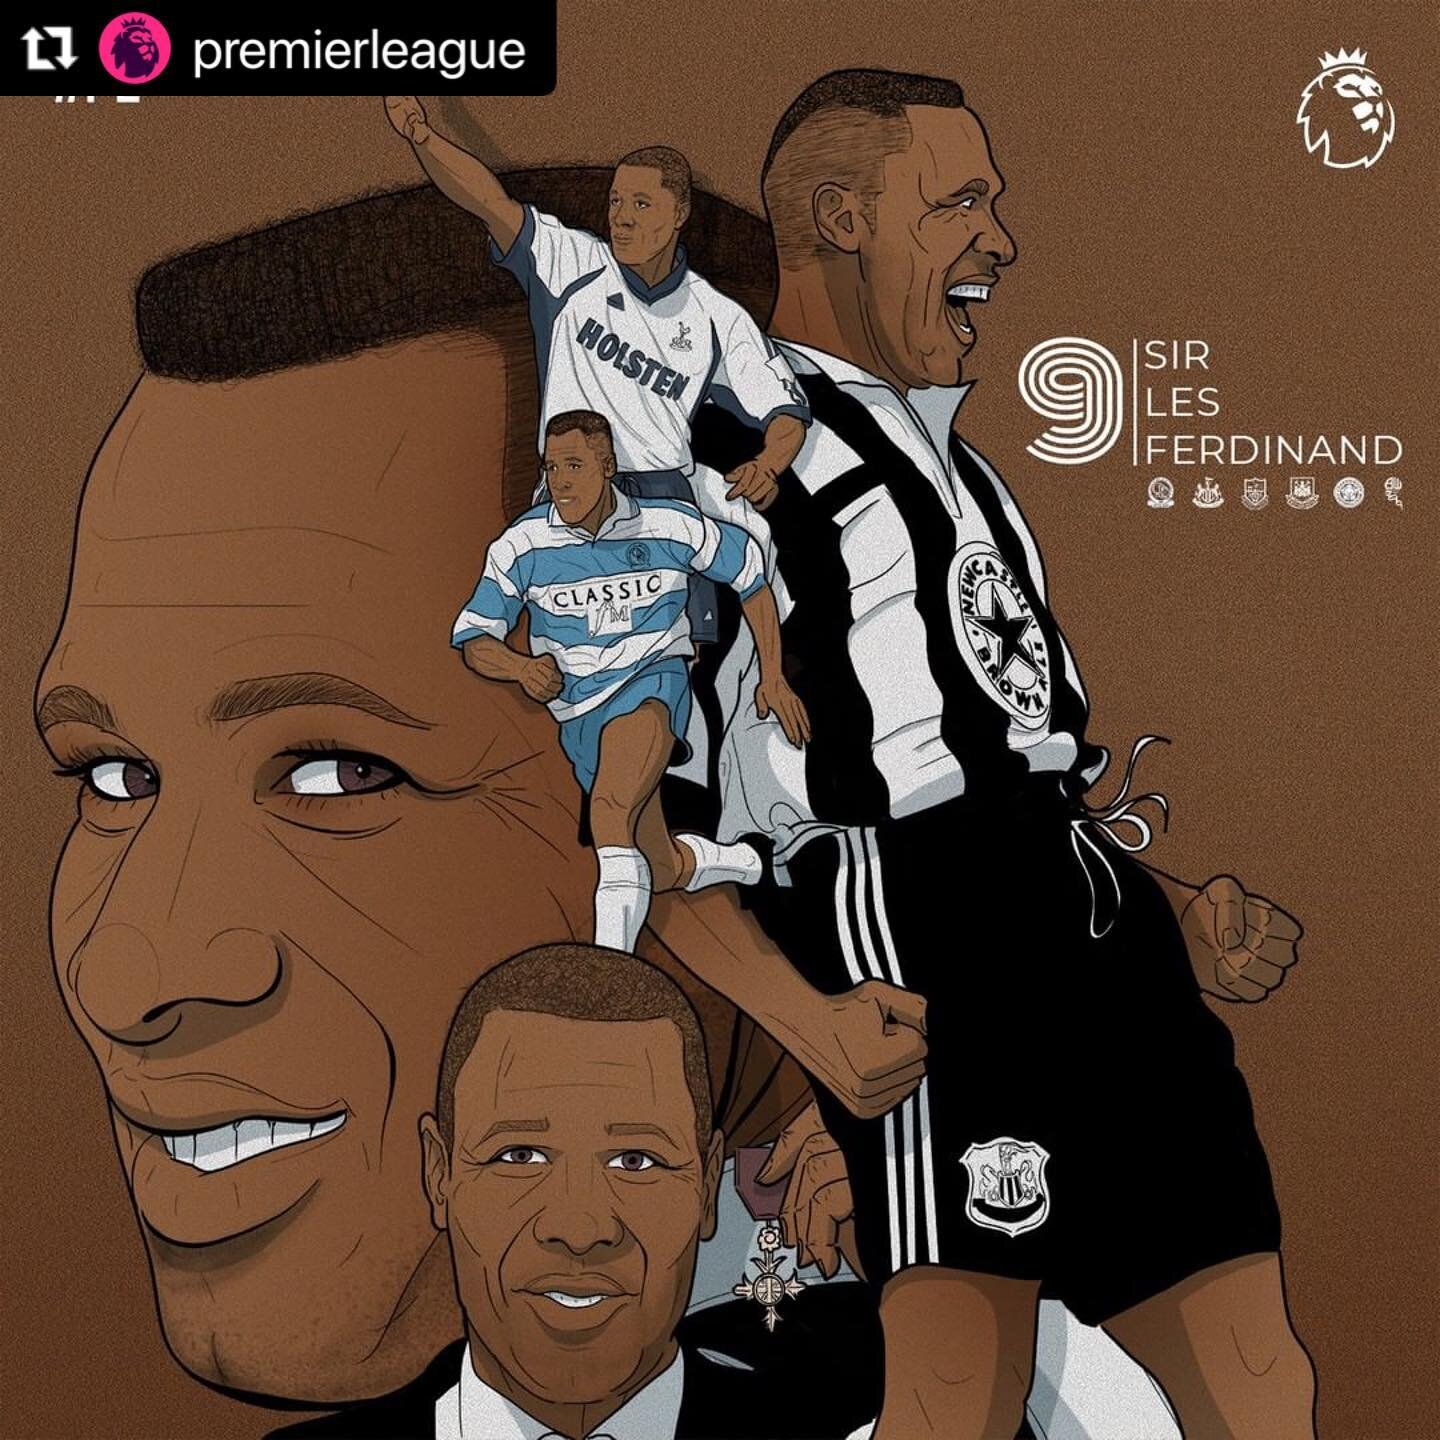 #Repost @premierleague with @make_repost
・・・
&lsquo;It&rsquo;s special when someone shows everyone what&rsquo;s possible and overcomes impossible odds&rsquo;

To mark Black History Month we&rsquo;re celebrating the players who changed the game, paved